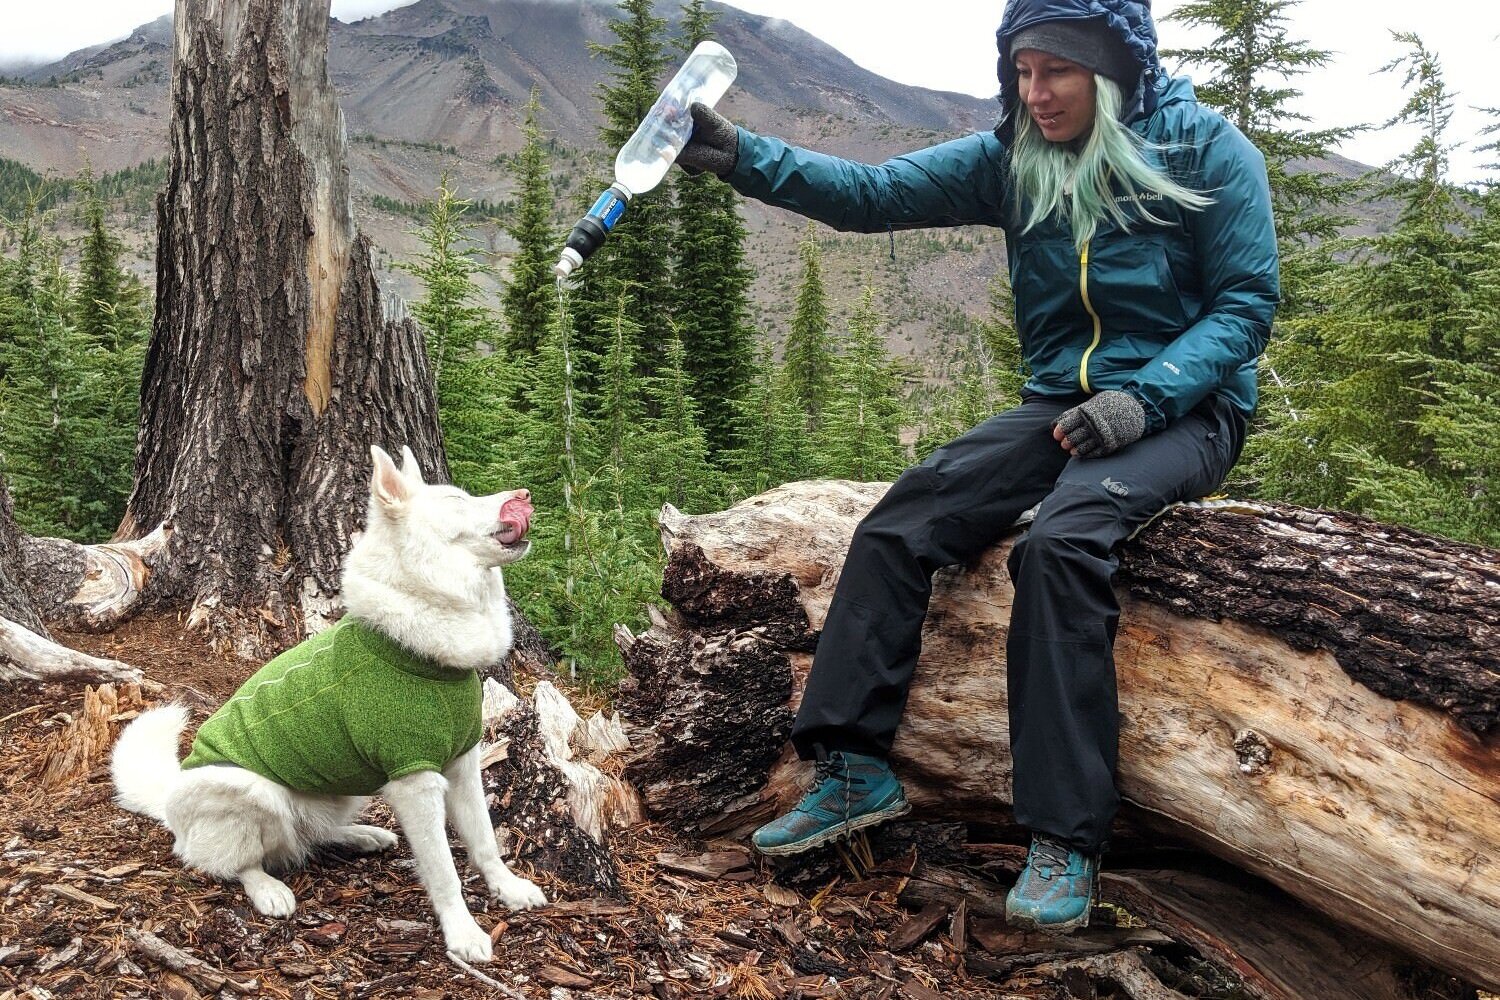 Make sure to filter all of the water you offer your dog in the backcountry